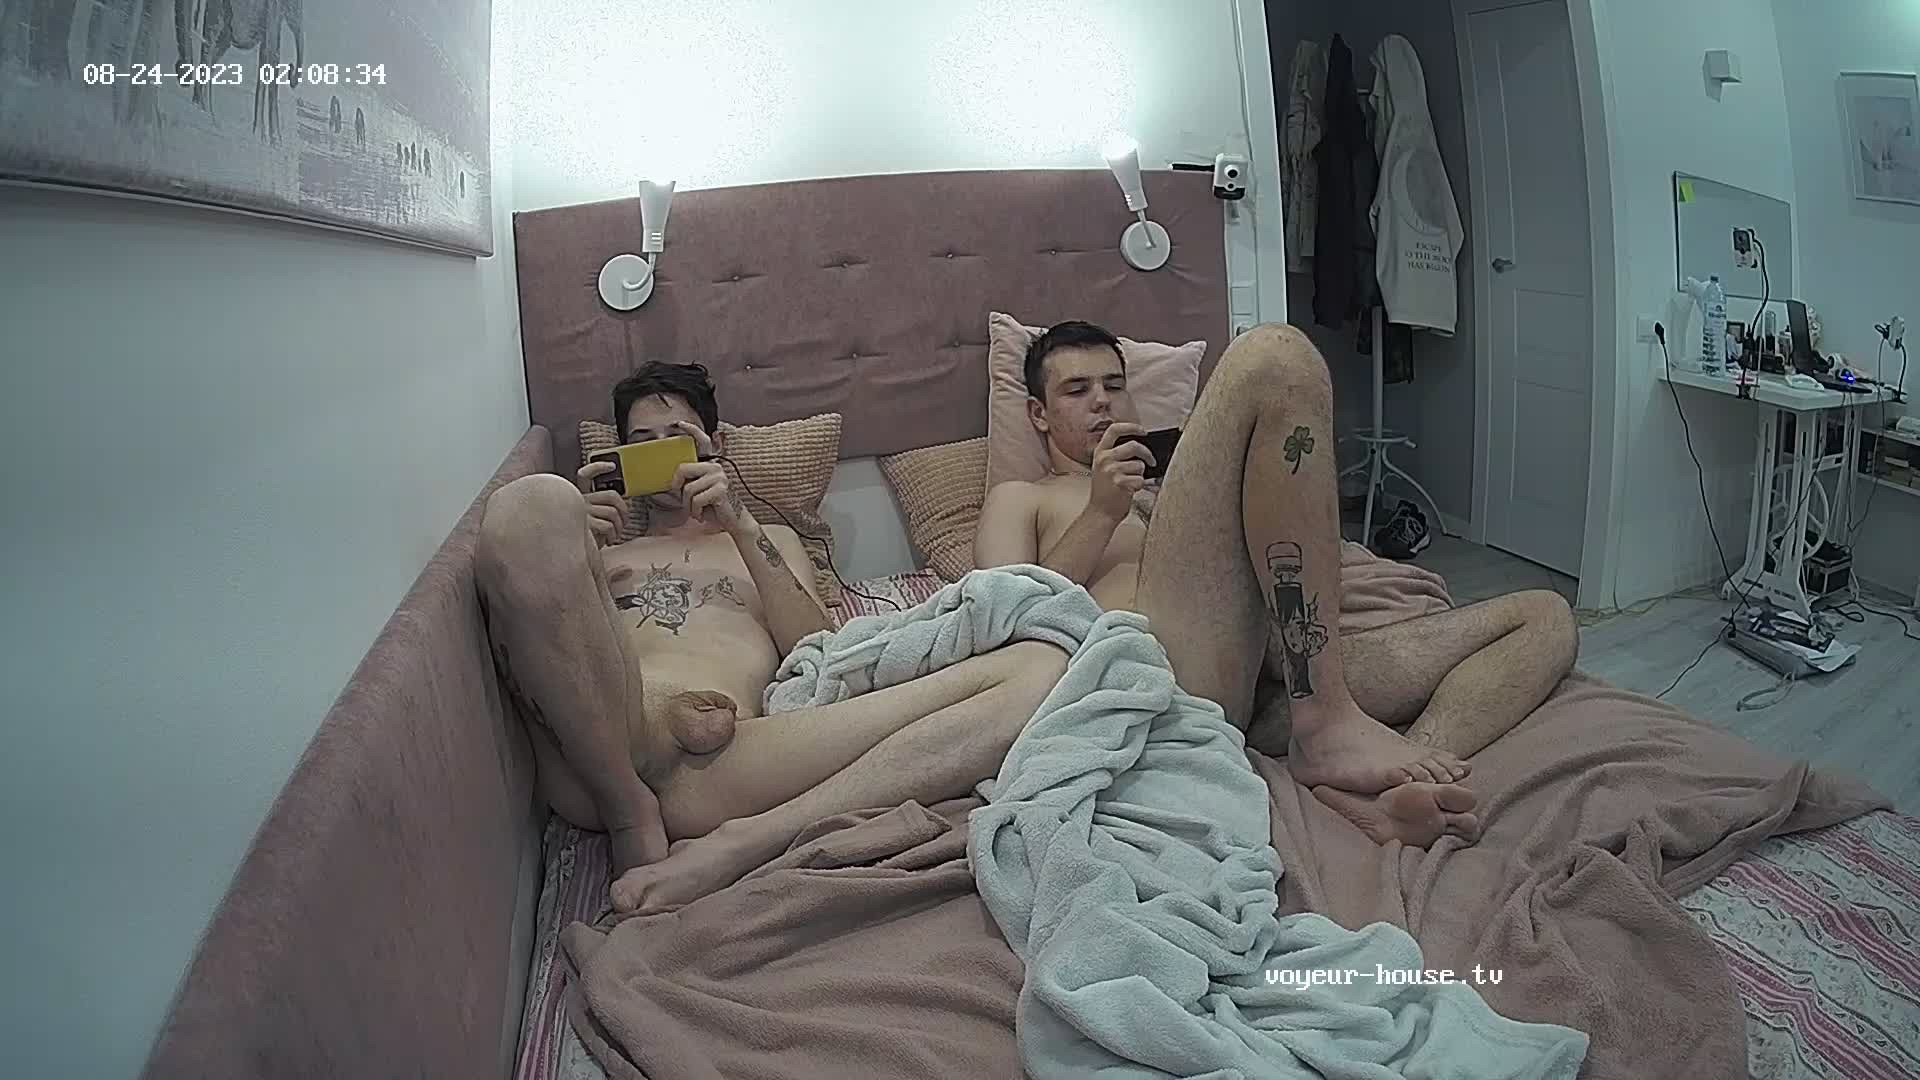 Artem & Tristan naked on the bed & play fight 24 Aug 2023